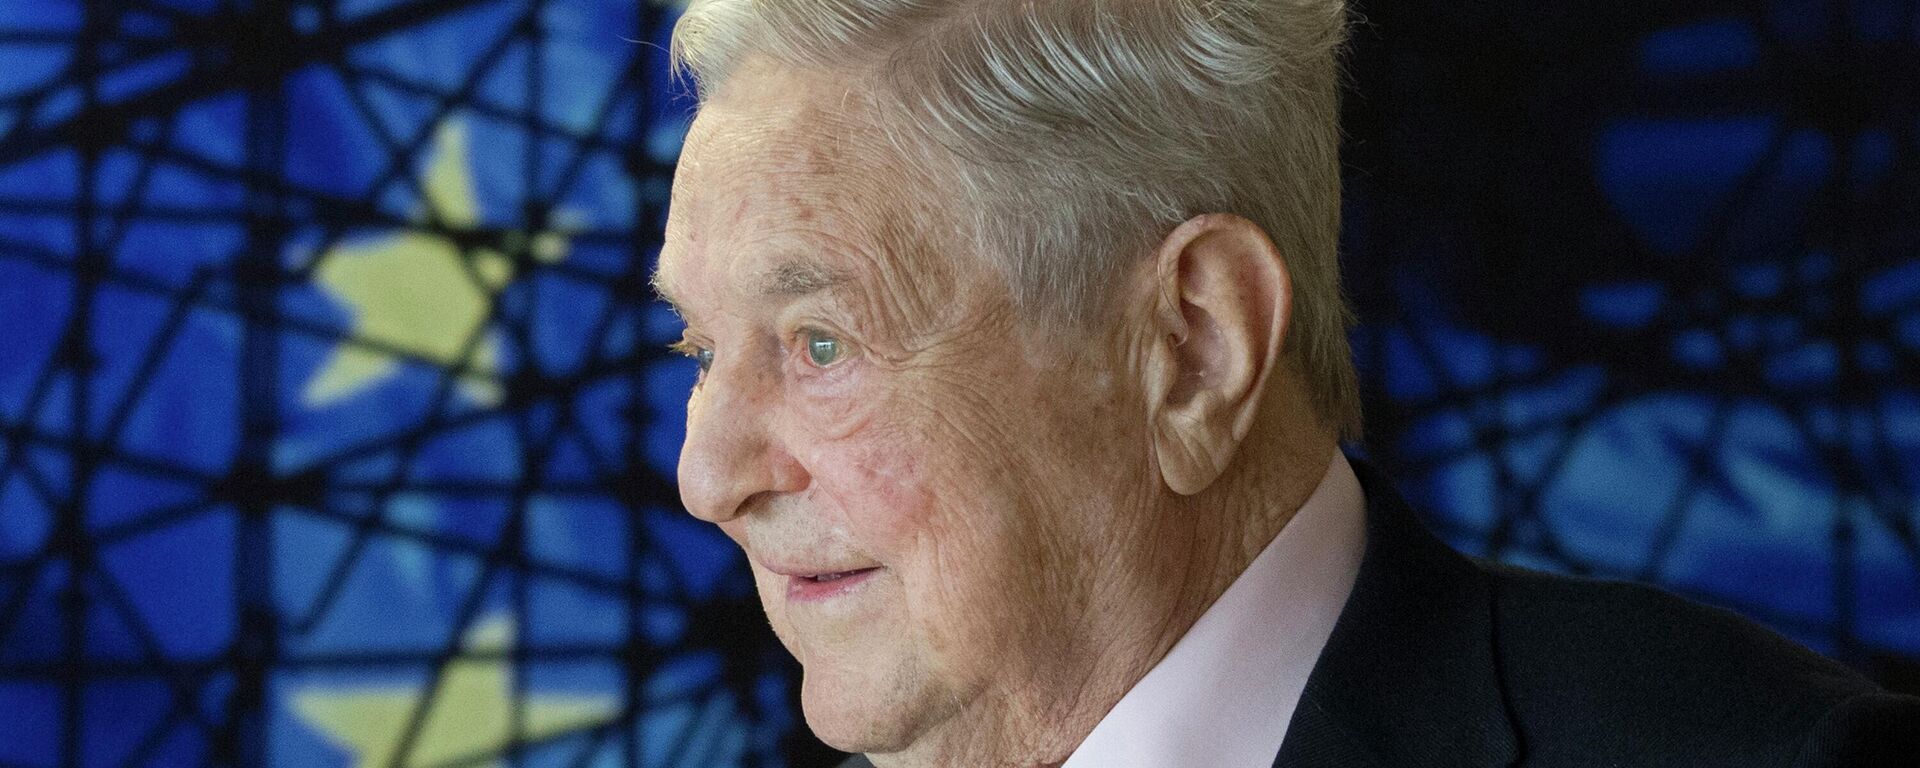 In this Thursday, April 27, 2017 file photom, George Soros, Founder and Chairman of the Open Society Foundation, waits for the start of a meeting at EU headquarters in Brussels. - Sputnik International, 1920, 02.08.2022